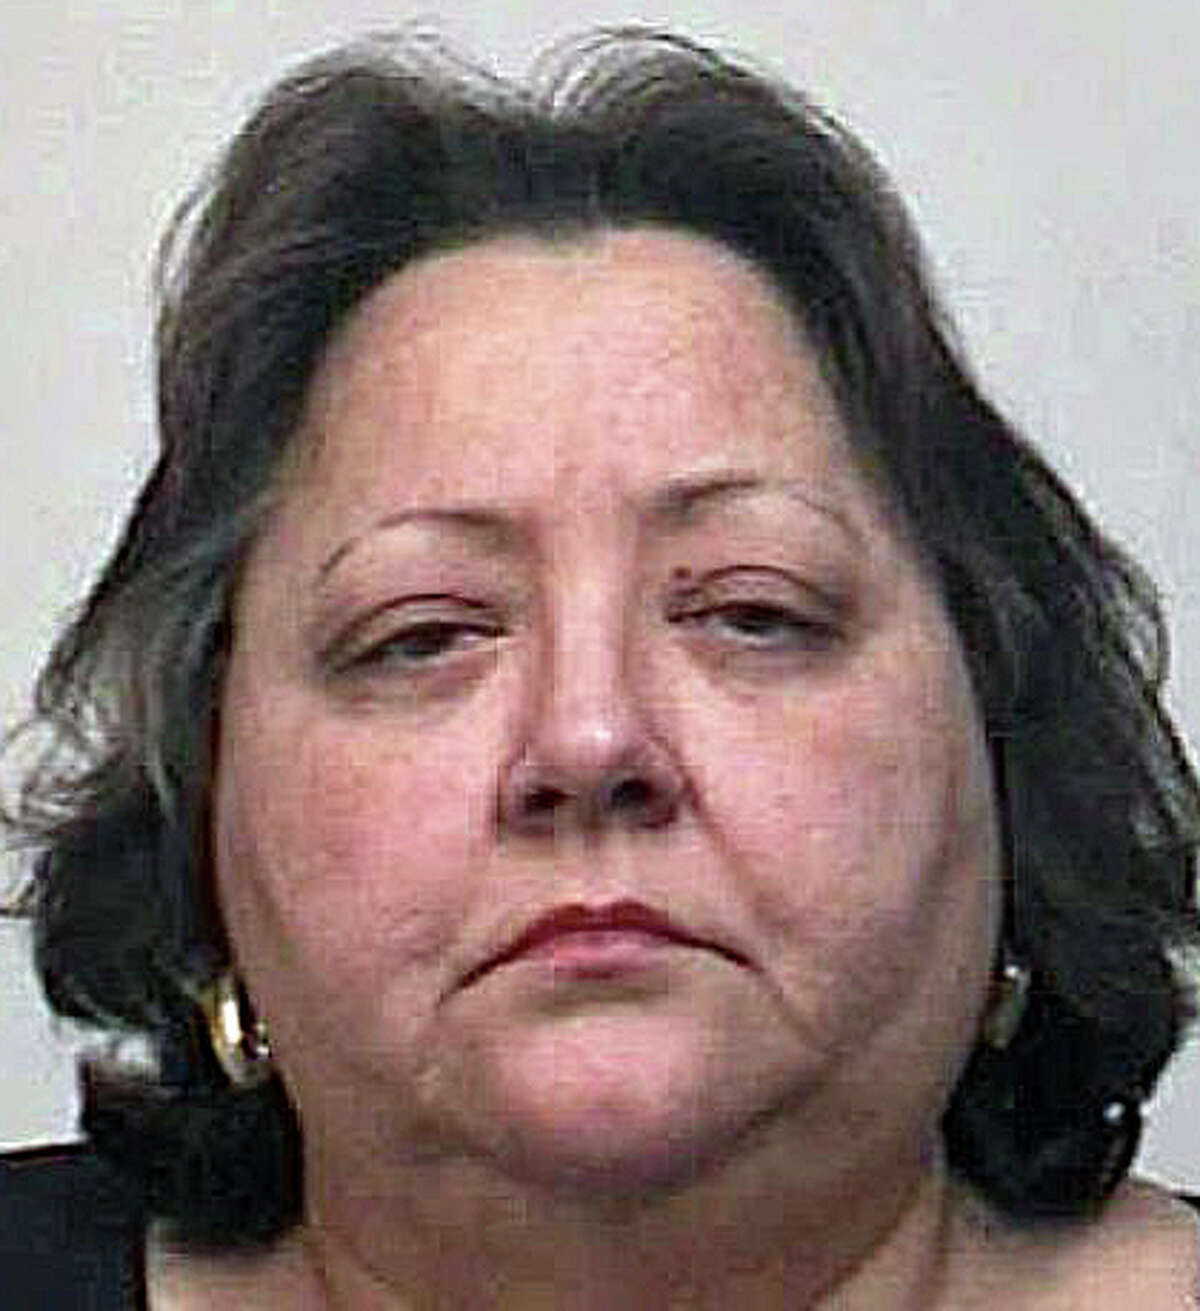 Carmella Jamshidian has been sentenced to nine years in prison on a charge that she stole more than $200,000 from the savings of three elderly Fairfield siblings.